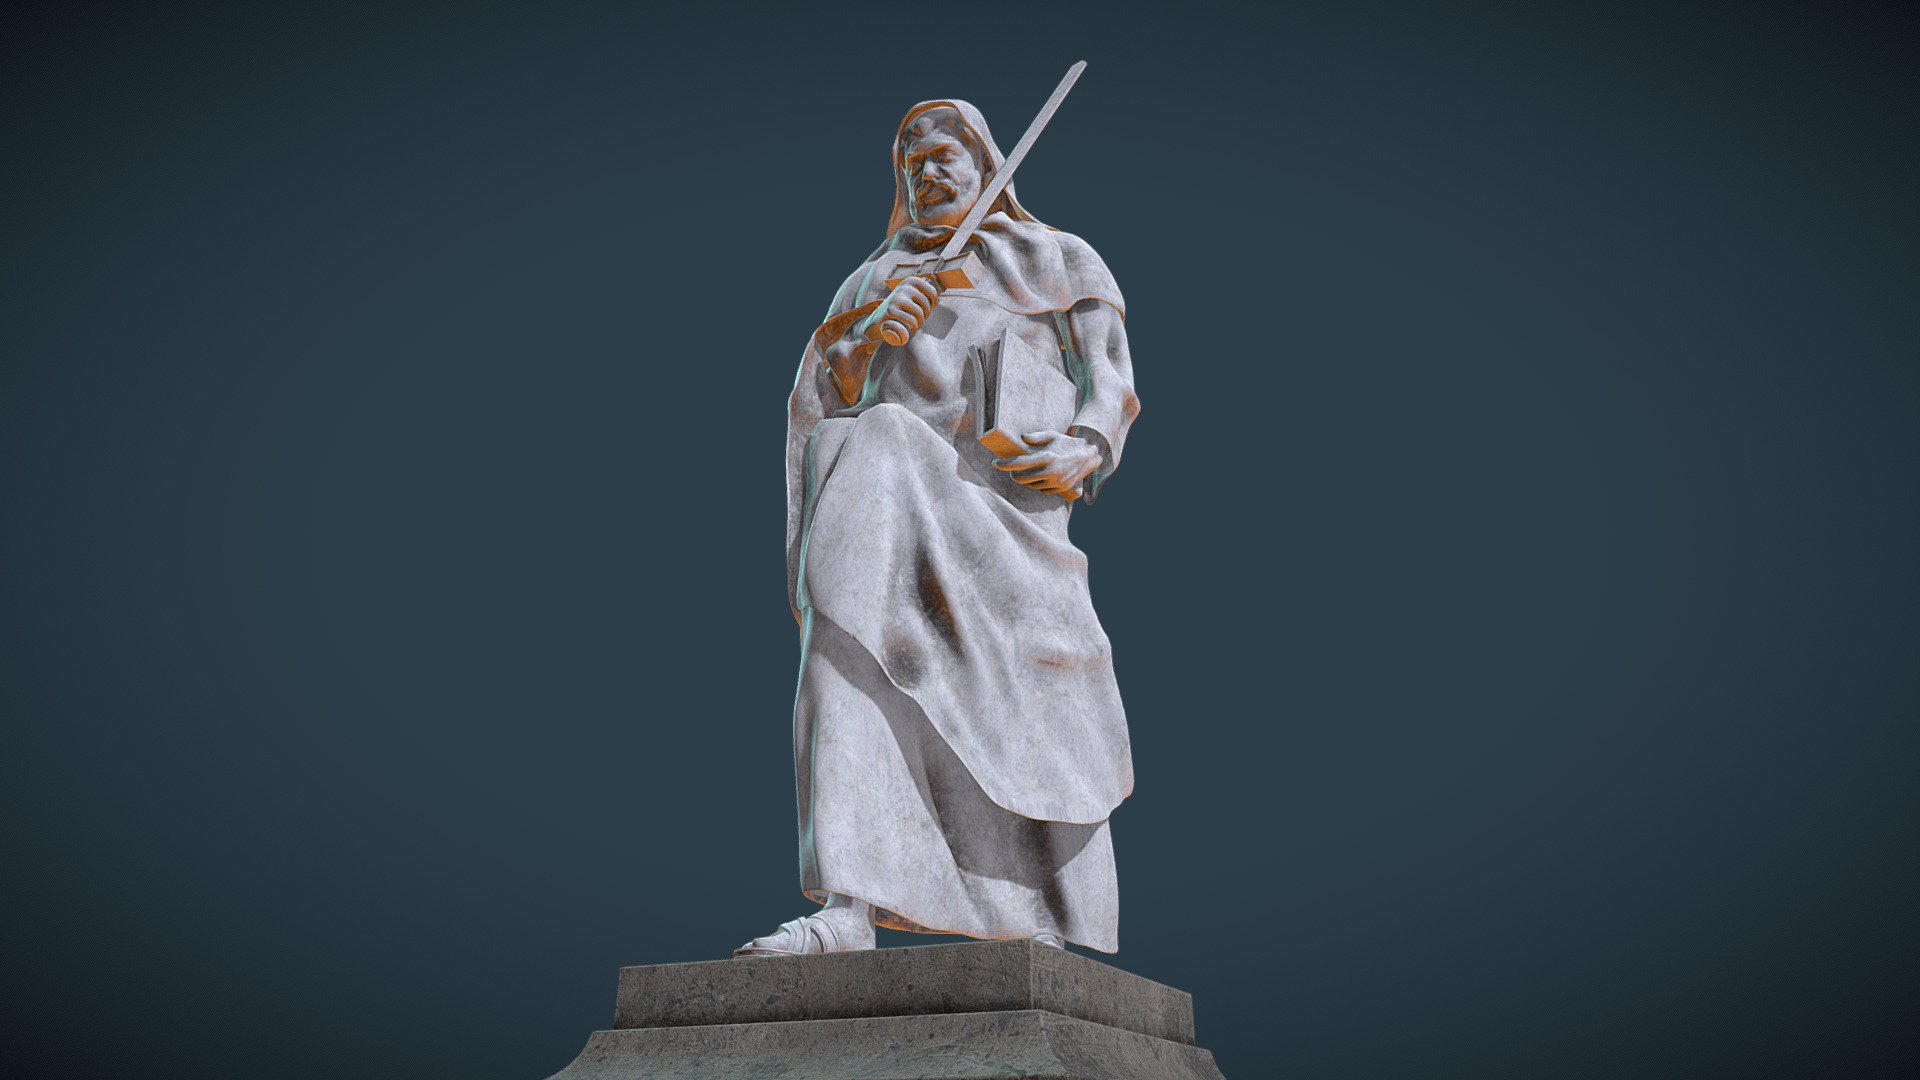 Old Statue from my Ancient pack.                     

Video Showcase of the asset:https://www.youtube.com/watch?v=RI27q8edAhs&amp;t=6s                  

Contact me for a discount of the full pack 3d model